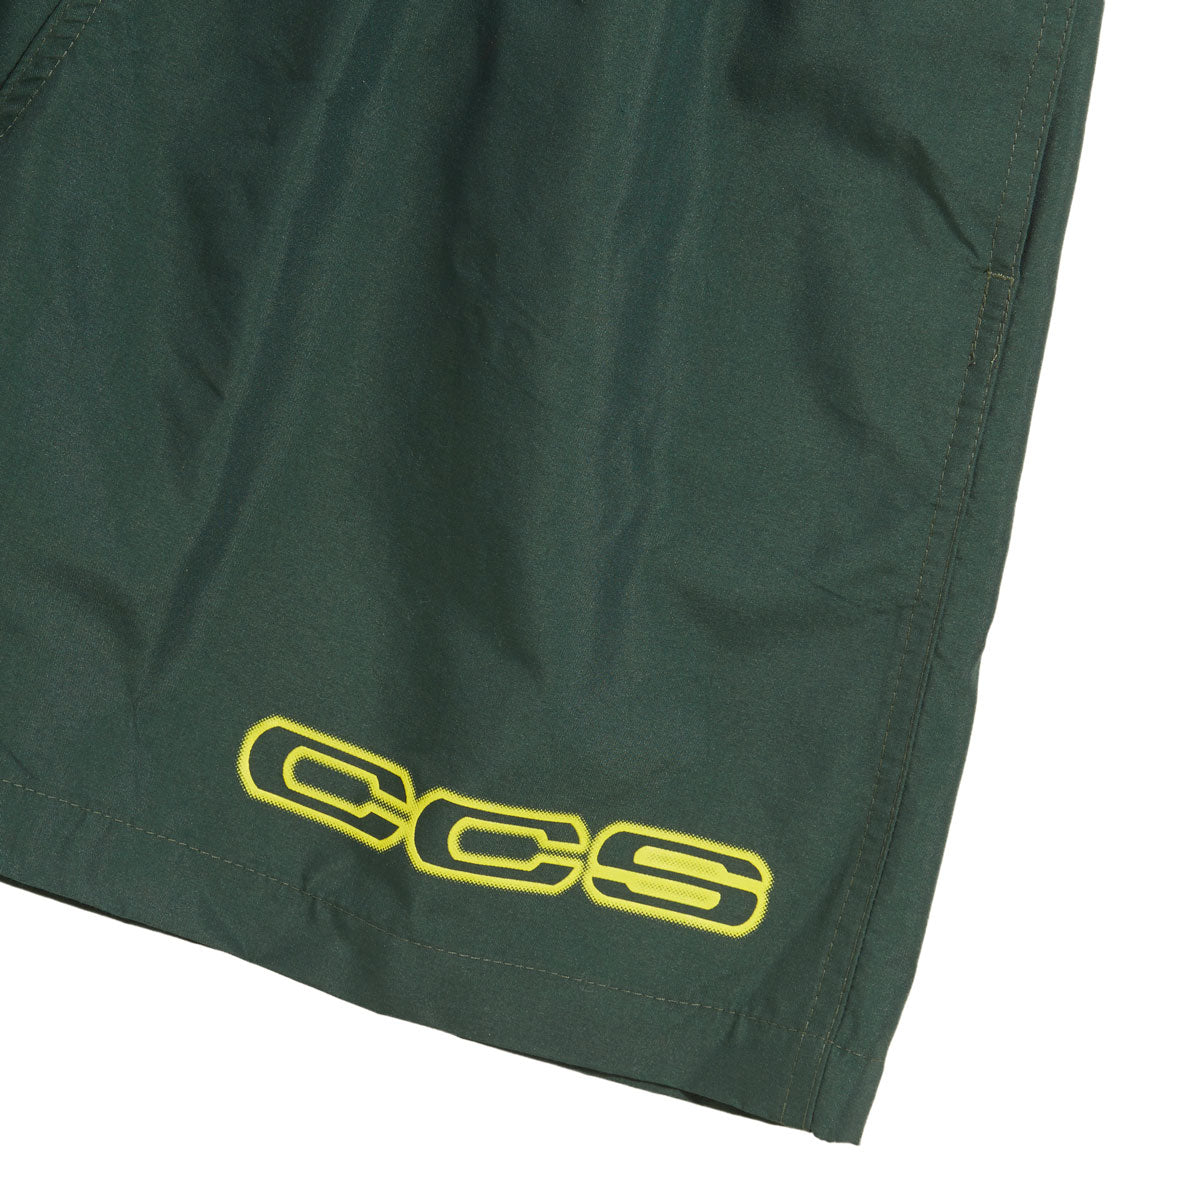 CCS 96 Neo Logo Shorts - Forest/Yellow image 3